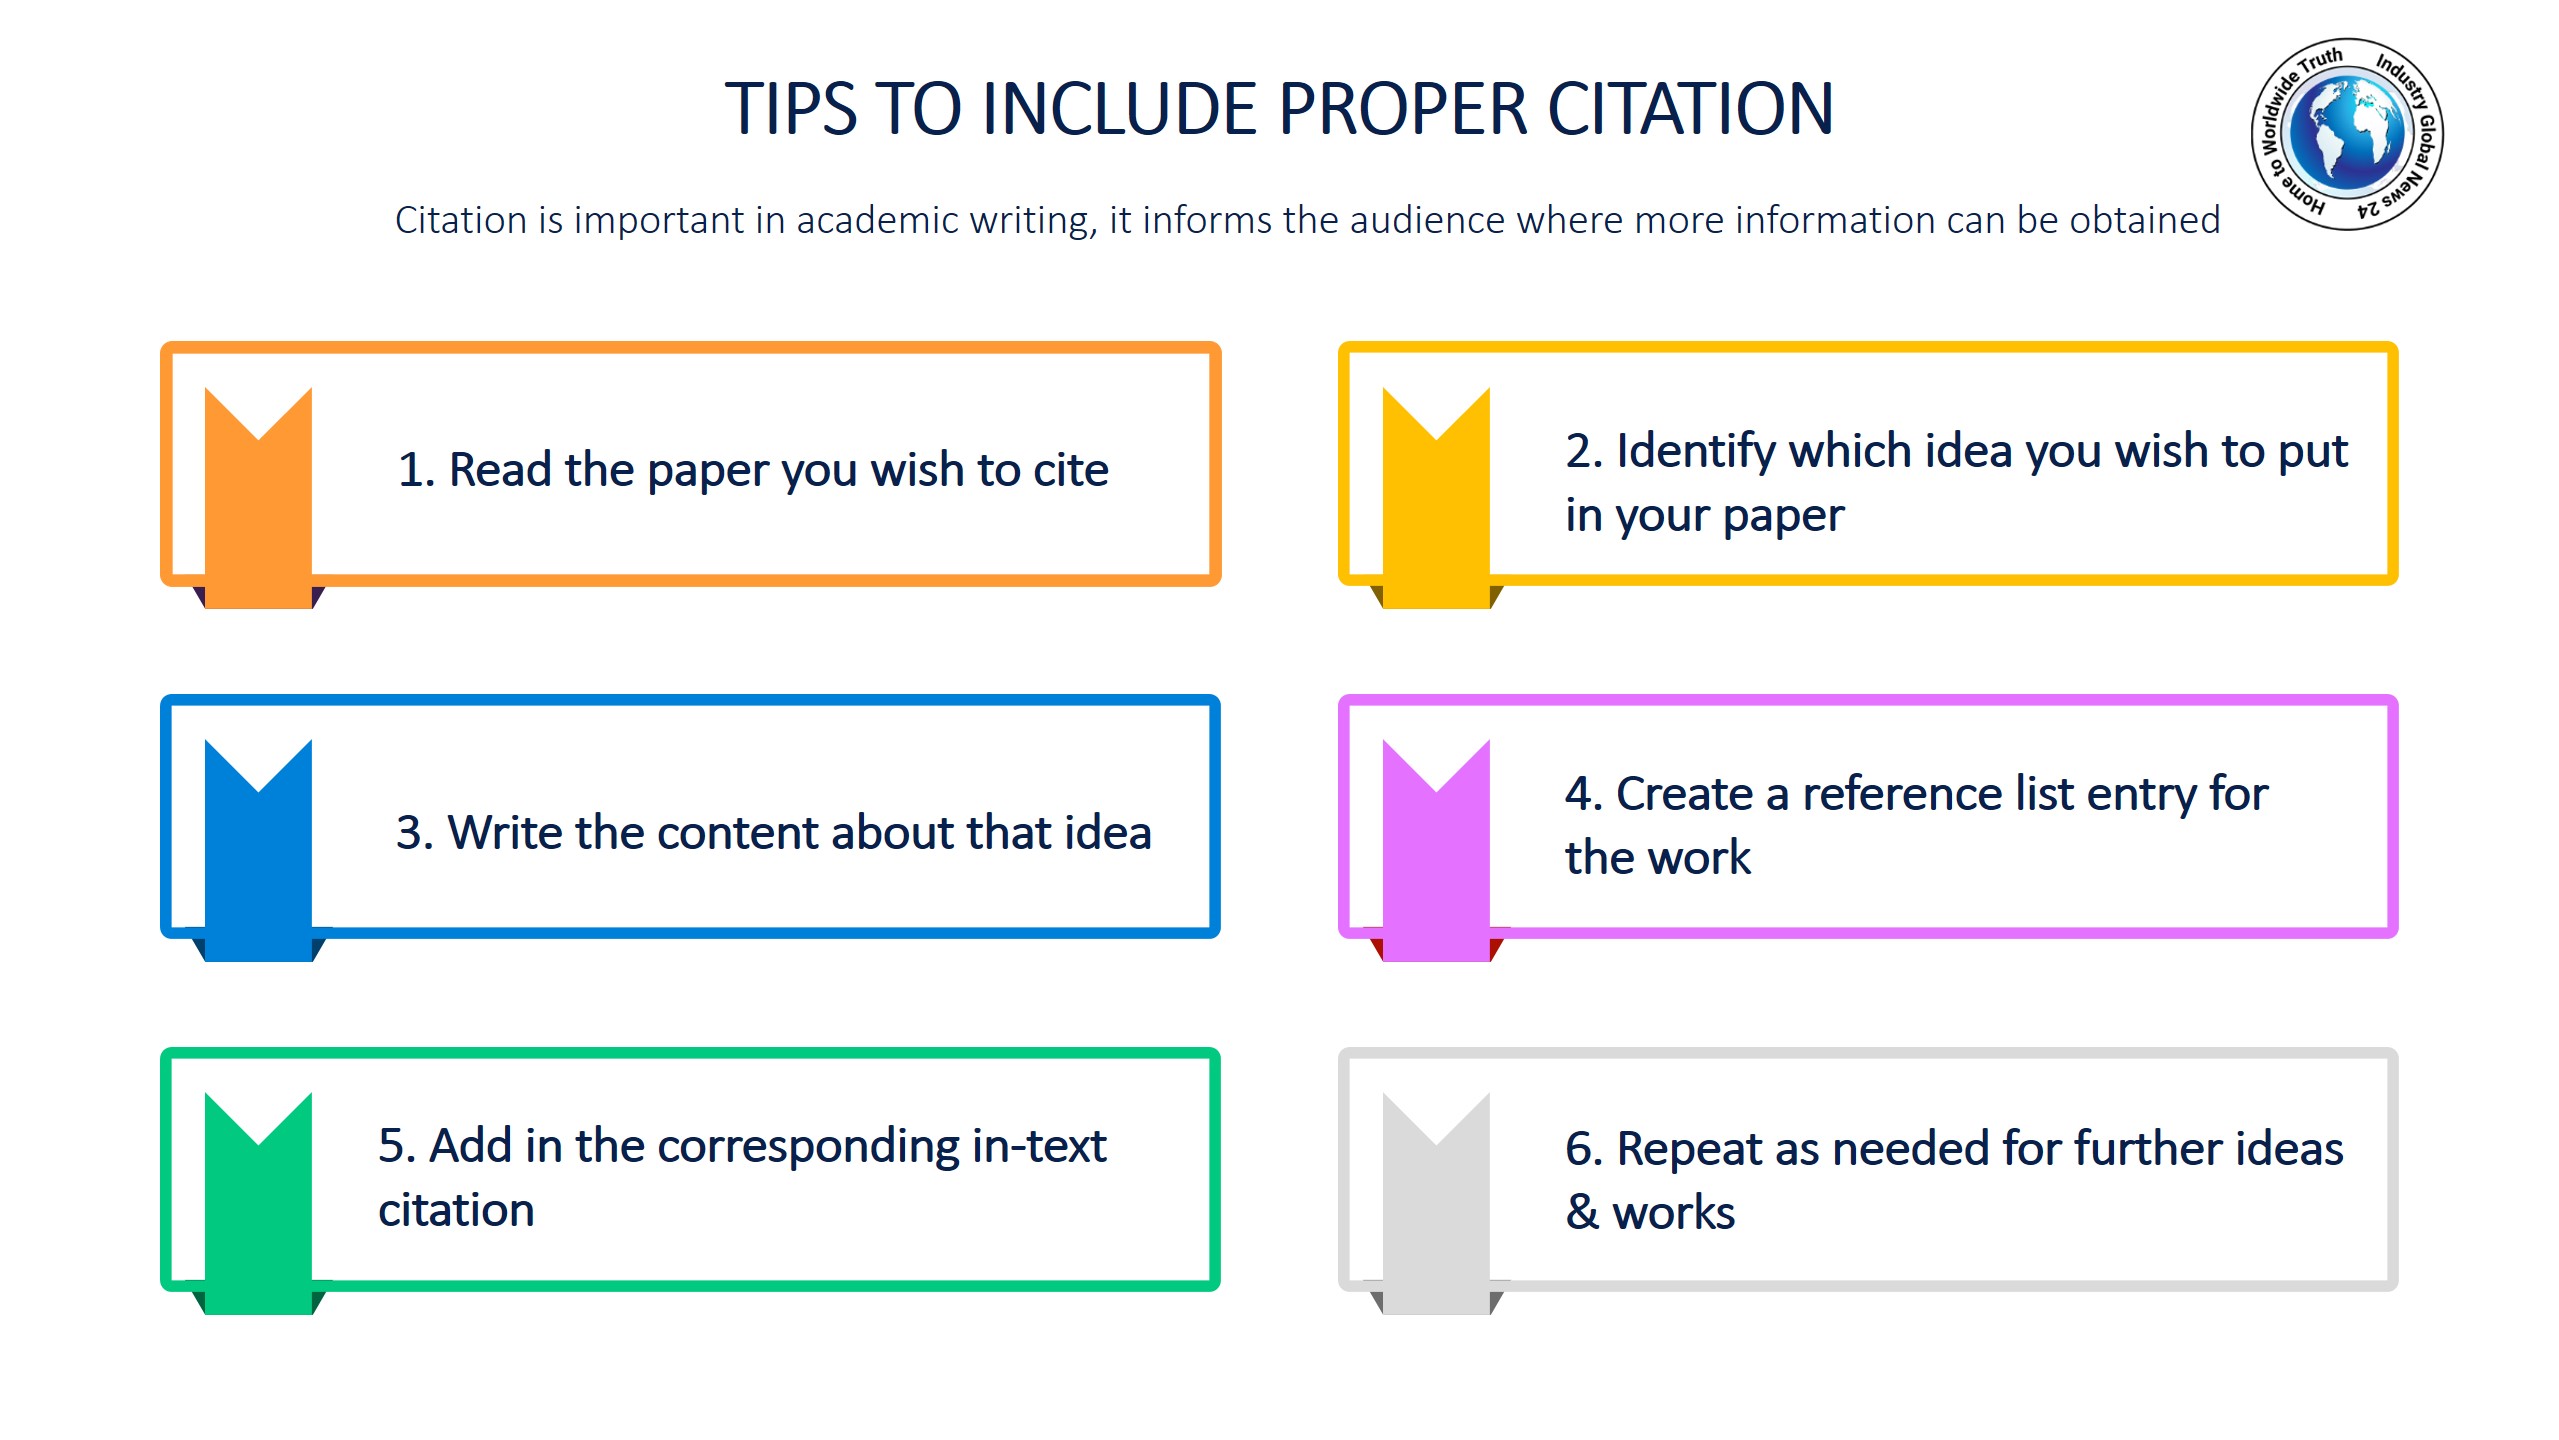 Tips to include proper citation